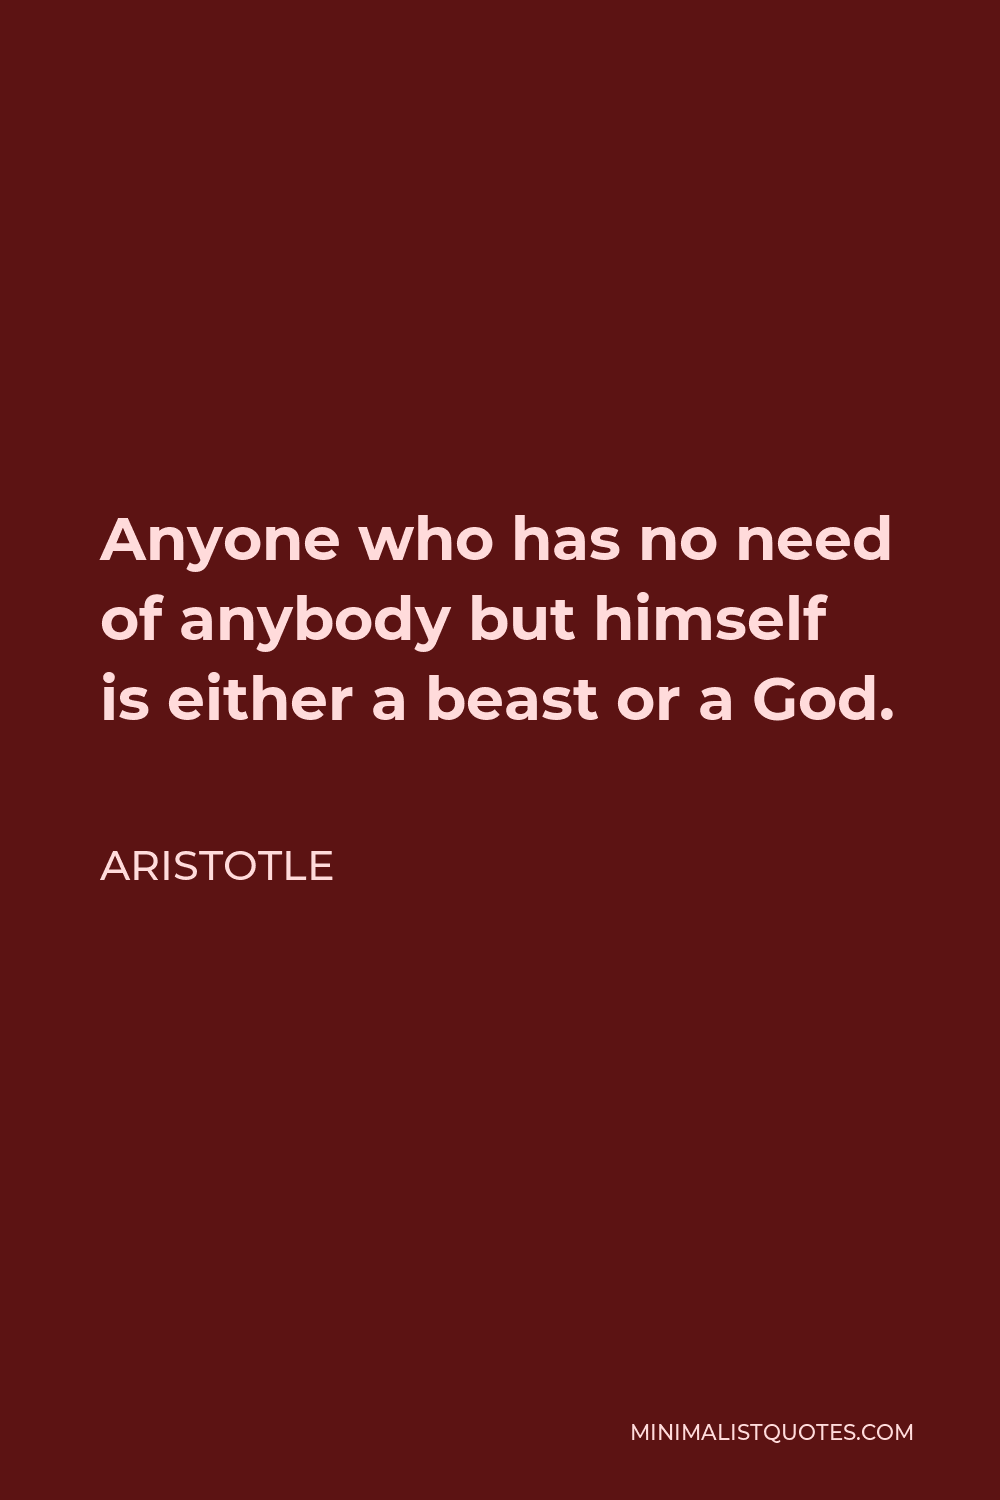 Aristotle Quote - Anyone who has no need of anybody but himself is either a beast or a God.